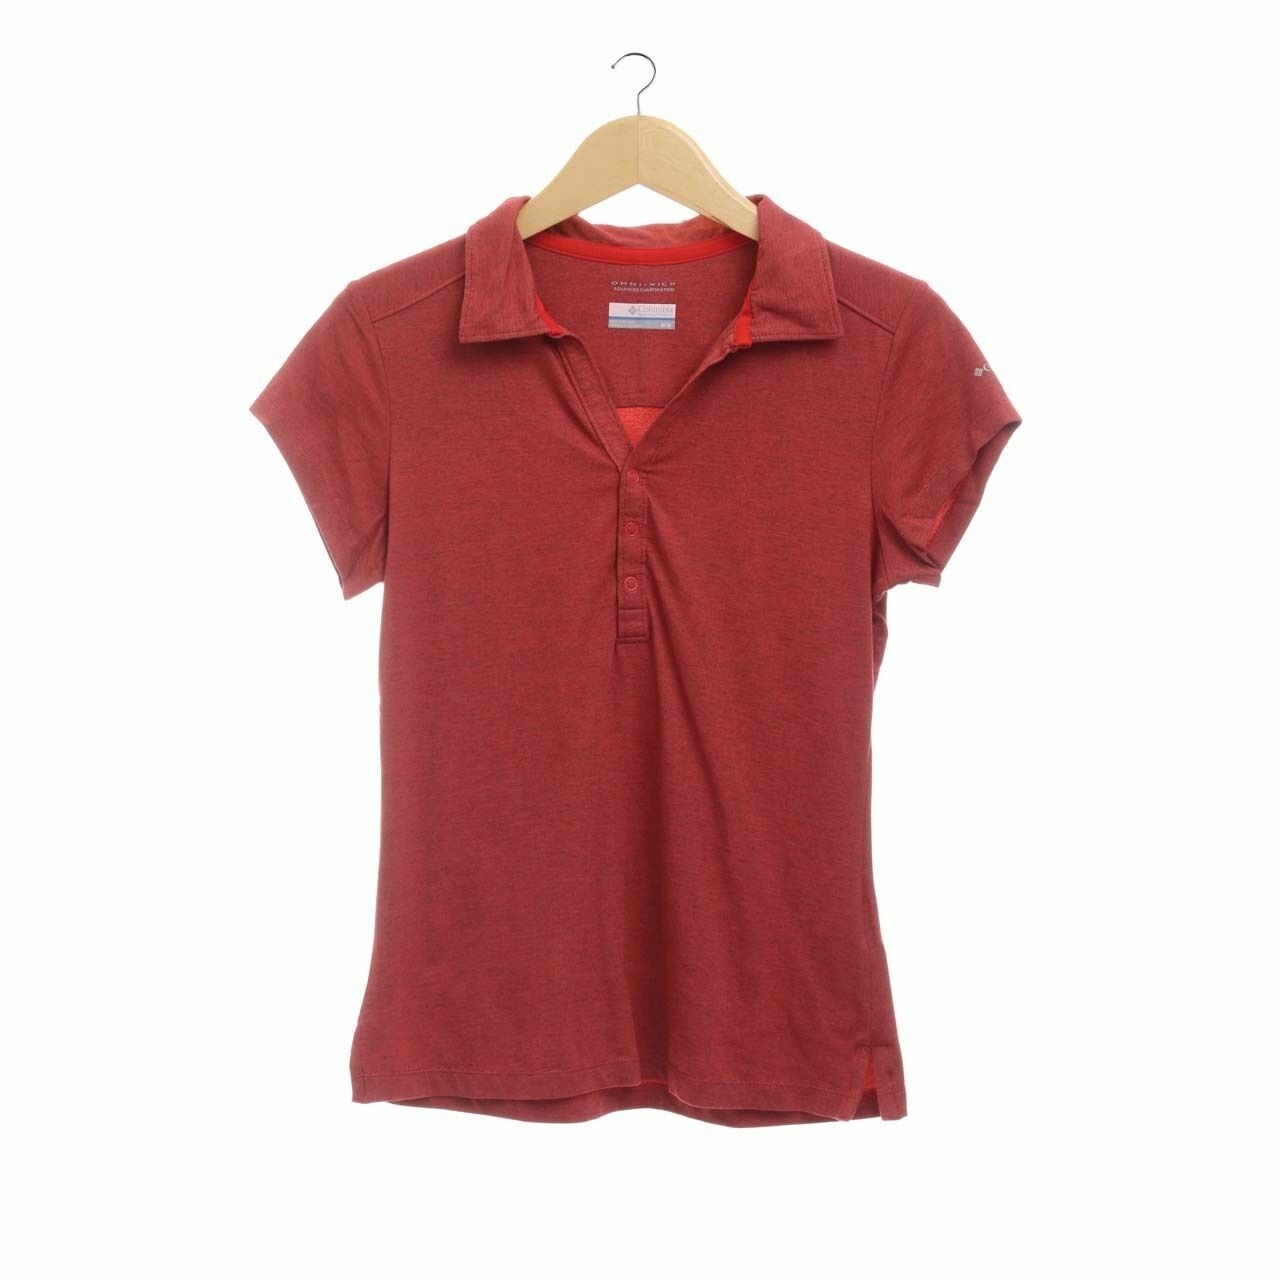 Columbia Red T-Shirt